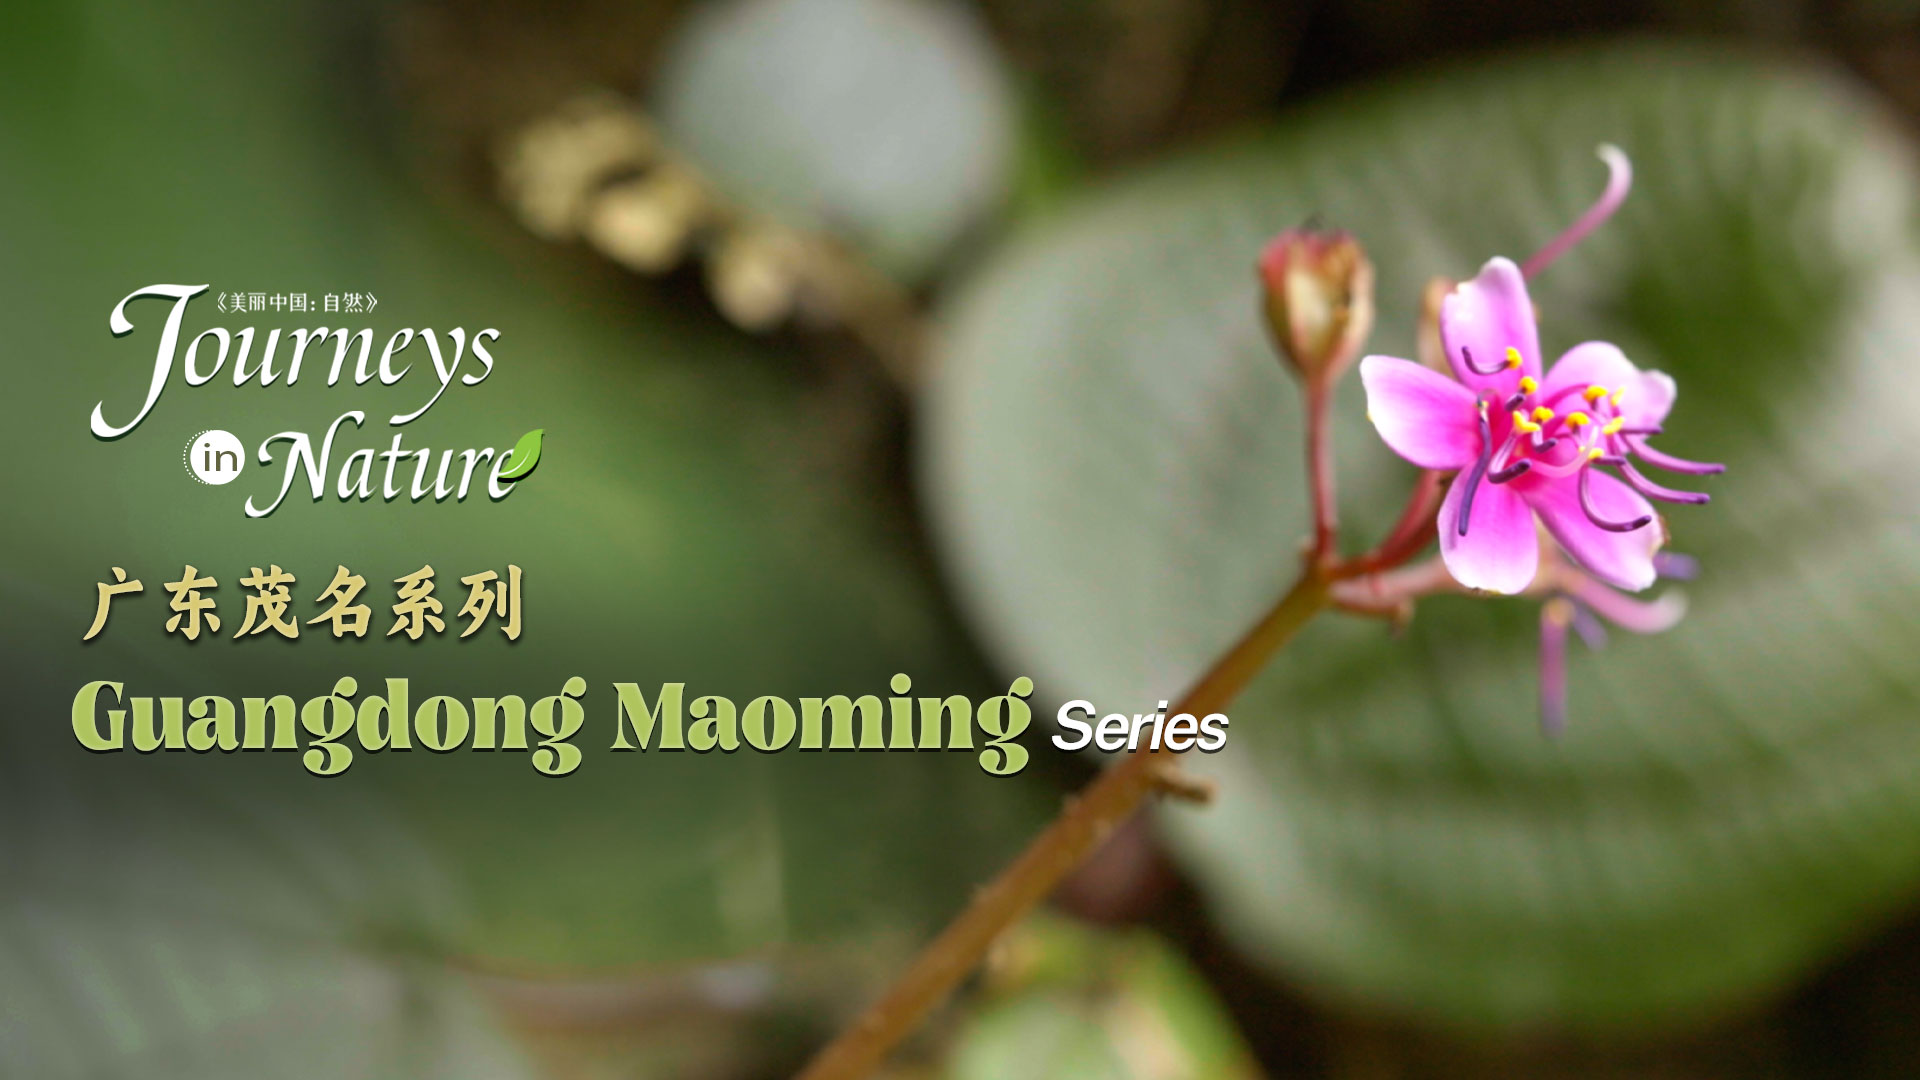 Guangdong Maoming Series Ep. 5: The flower 'guarded' by 'tiger's paws'